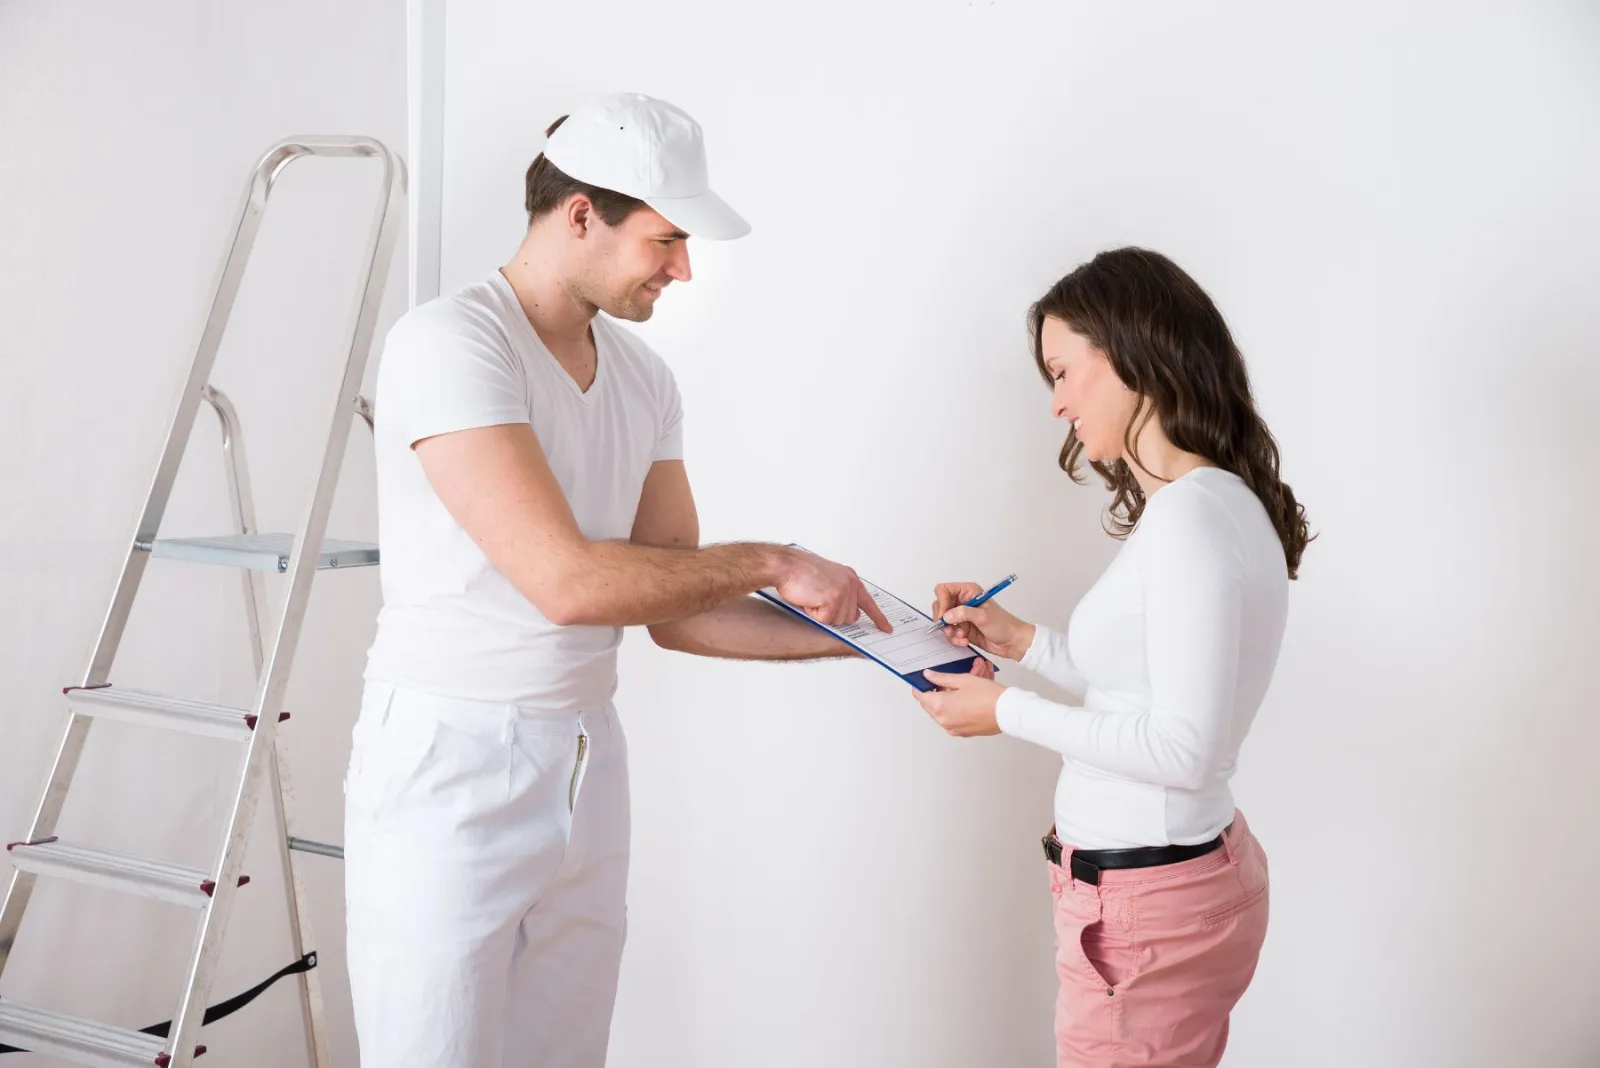 Professional Painting Contractors vs Painters - Which Should You Hire? 